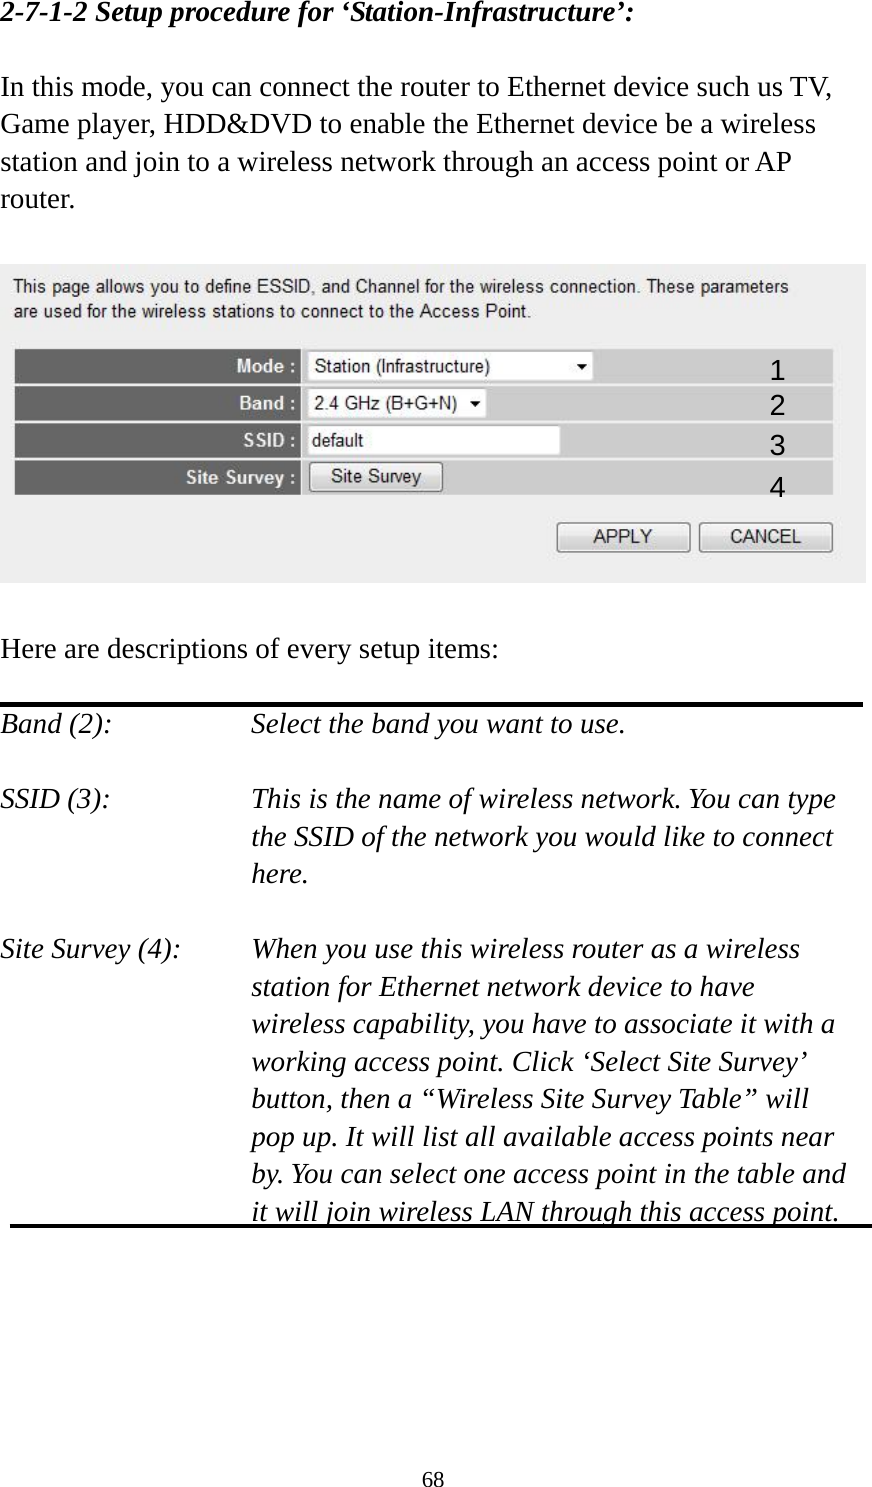 68 2-7-1-2 Setup procedure for ‘Station-Infrastructure’:  In this mode, you can connect the router to Ethernet device such us TV, Game player, HDD&amp;DVD to enable the Ethernet device be a wireless station and join to a wireless network through an access point or AP router.    Here are descriptions of every setup items:  Band (2):  Select the band you want to use.  SSID (3):  This is the name of wireless network. You can type the SSID of the network you would like to connect here.  Site Survey (4):  When you use this wireless router as a wireless station for Ethernet network device to have wireless capability, you have to associate it with a working access point. Click ‘Select Site Survey’ button, then a “Wireless Site Survey Table” will pop up. It will list all available access points near by. You can select one access point in the table and it will join wireless LAN through this access point.      1 2 3 4 